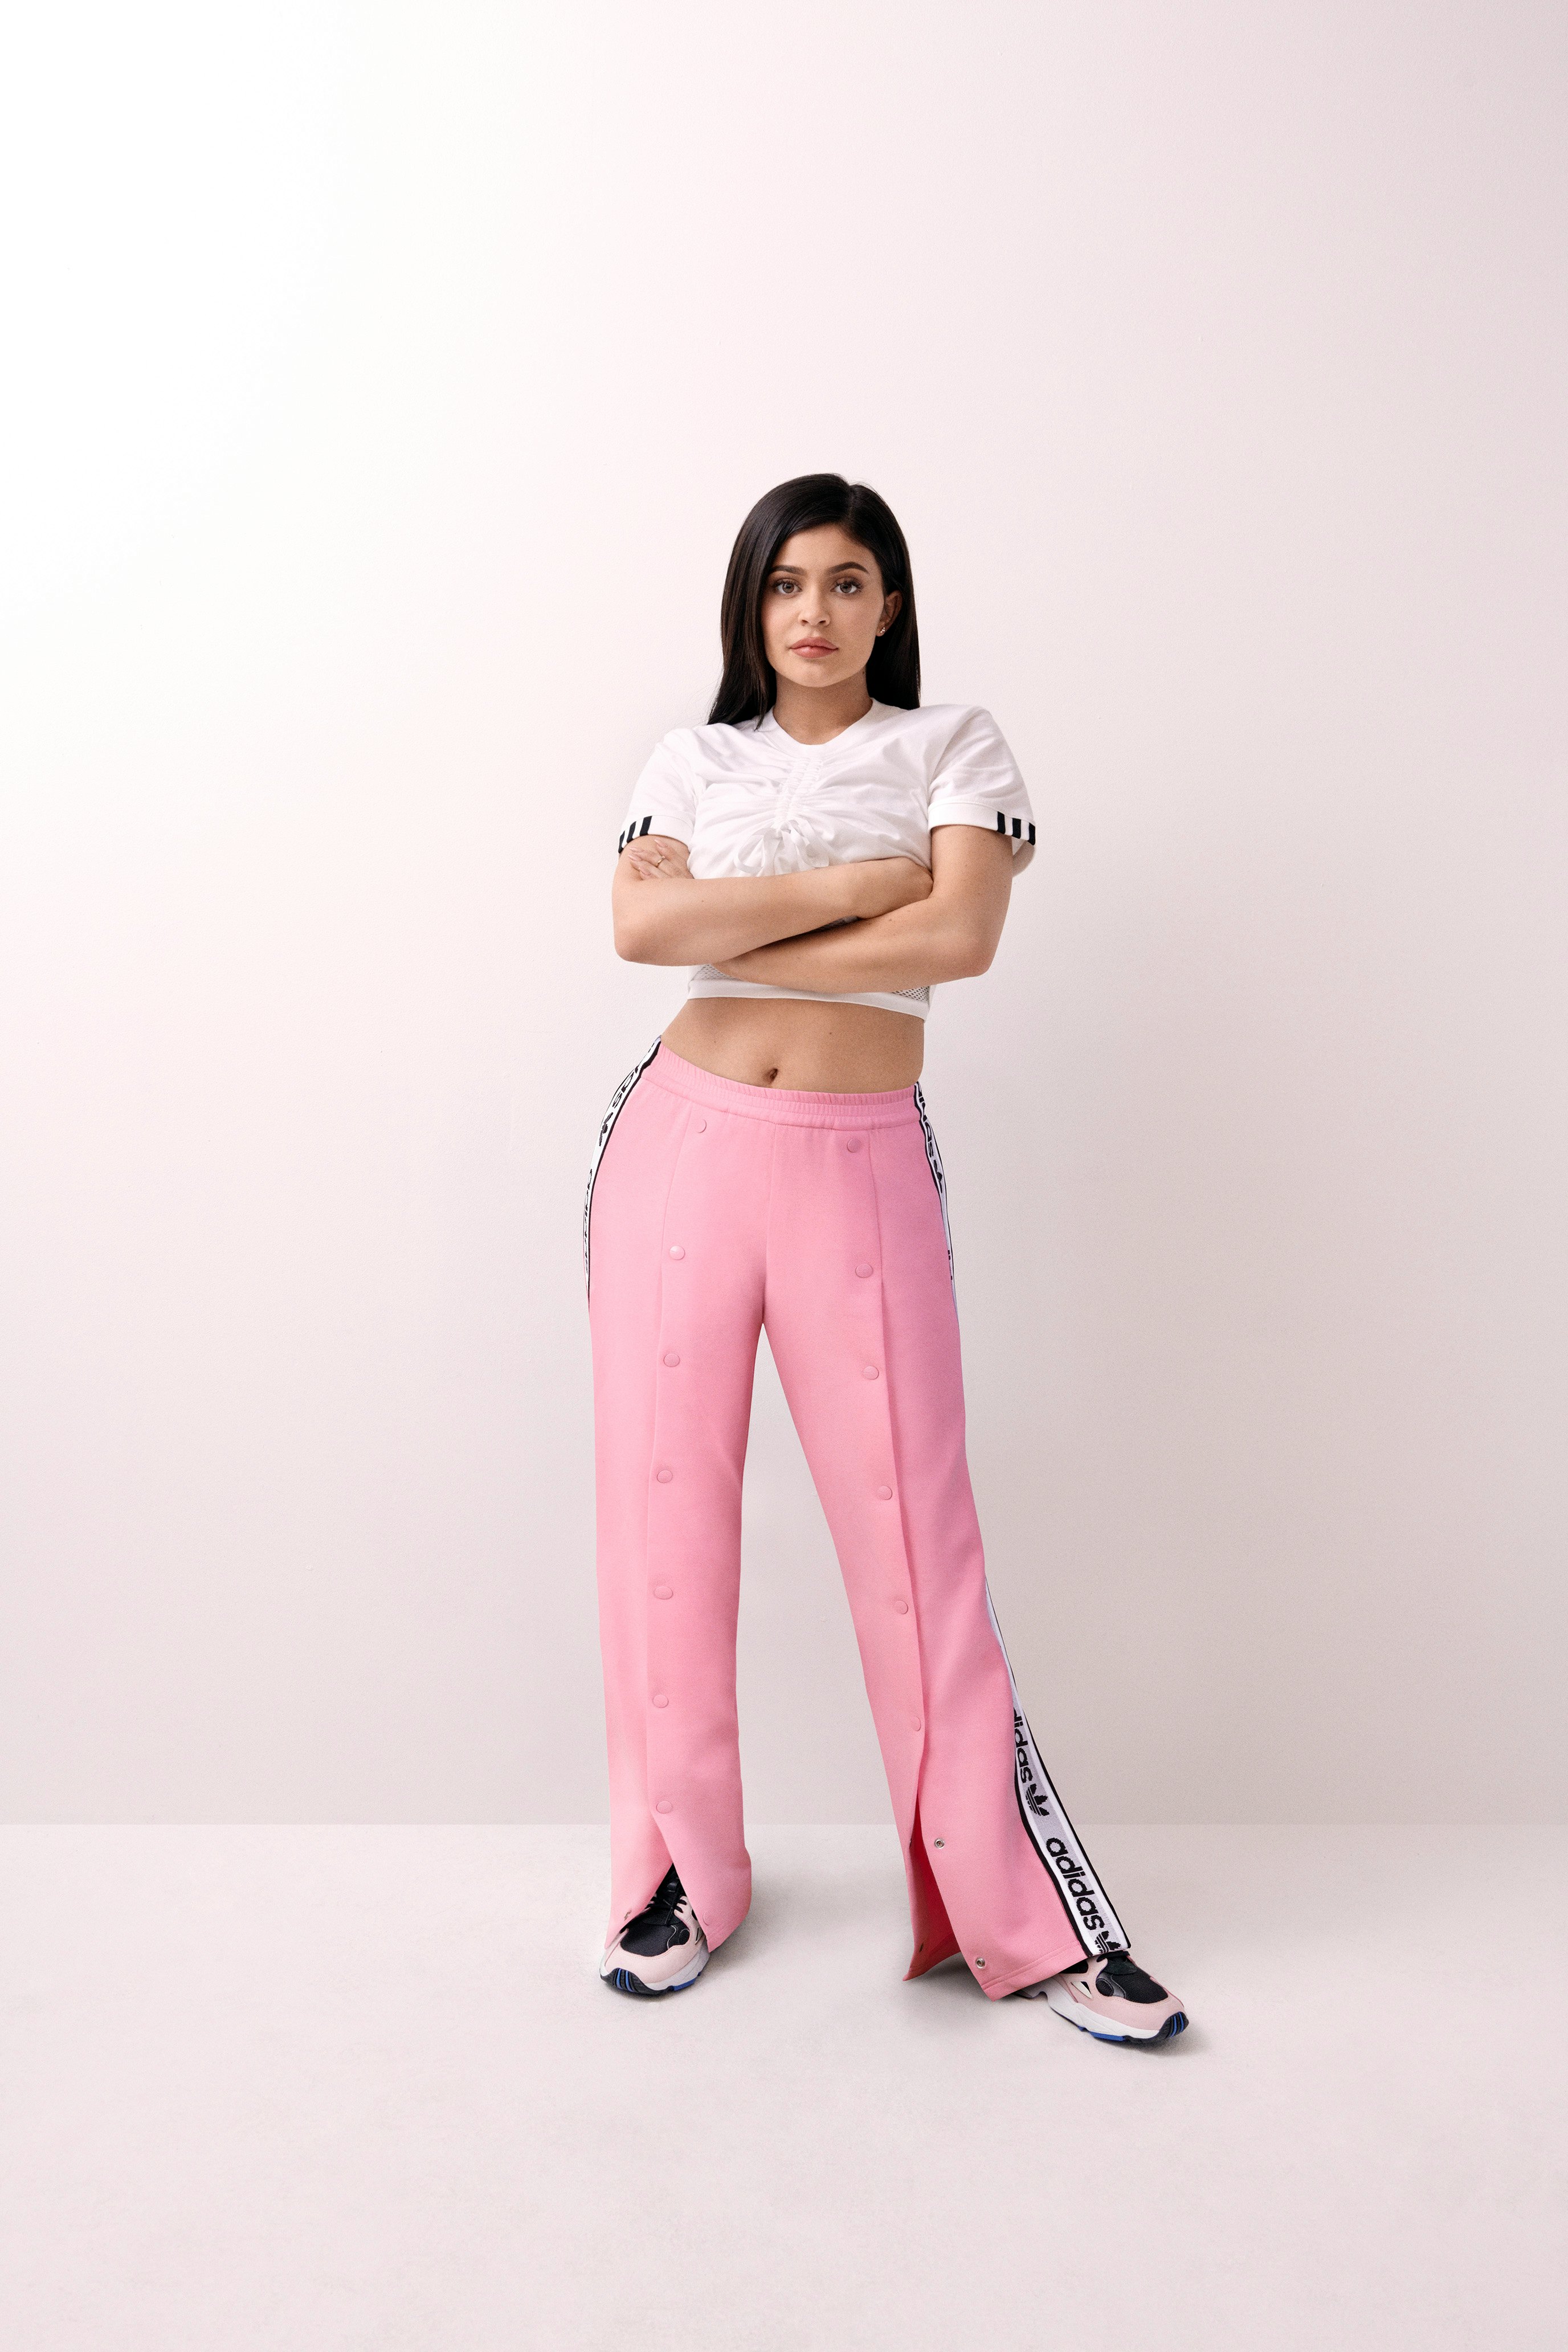 adidas x kylie jenner collection